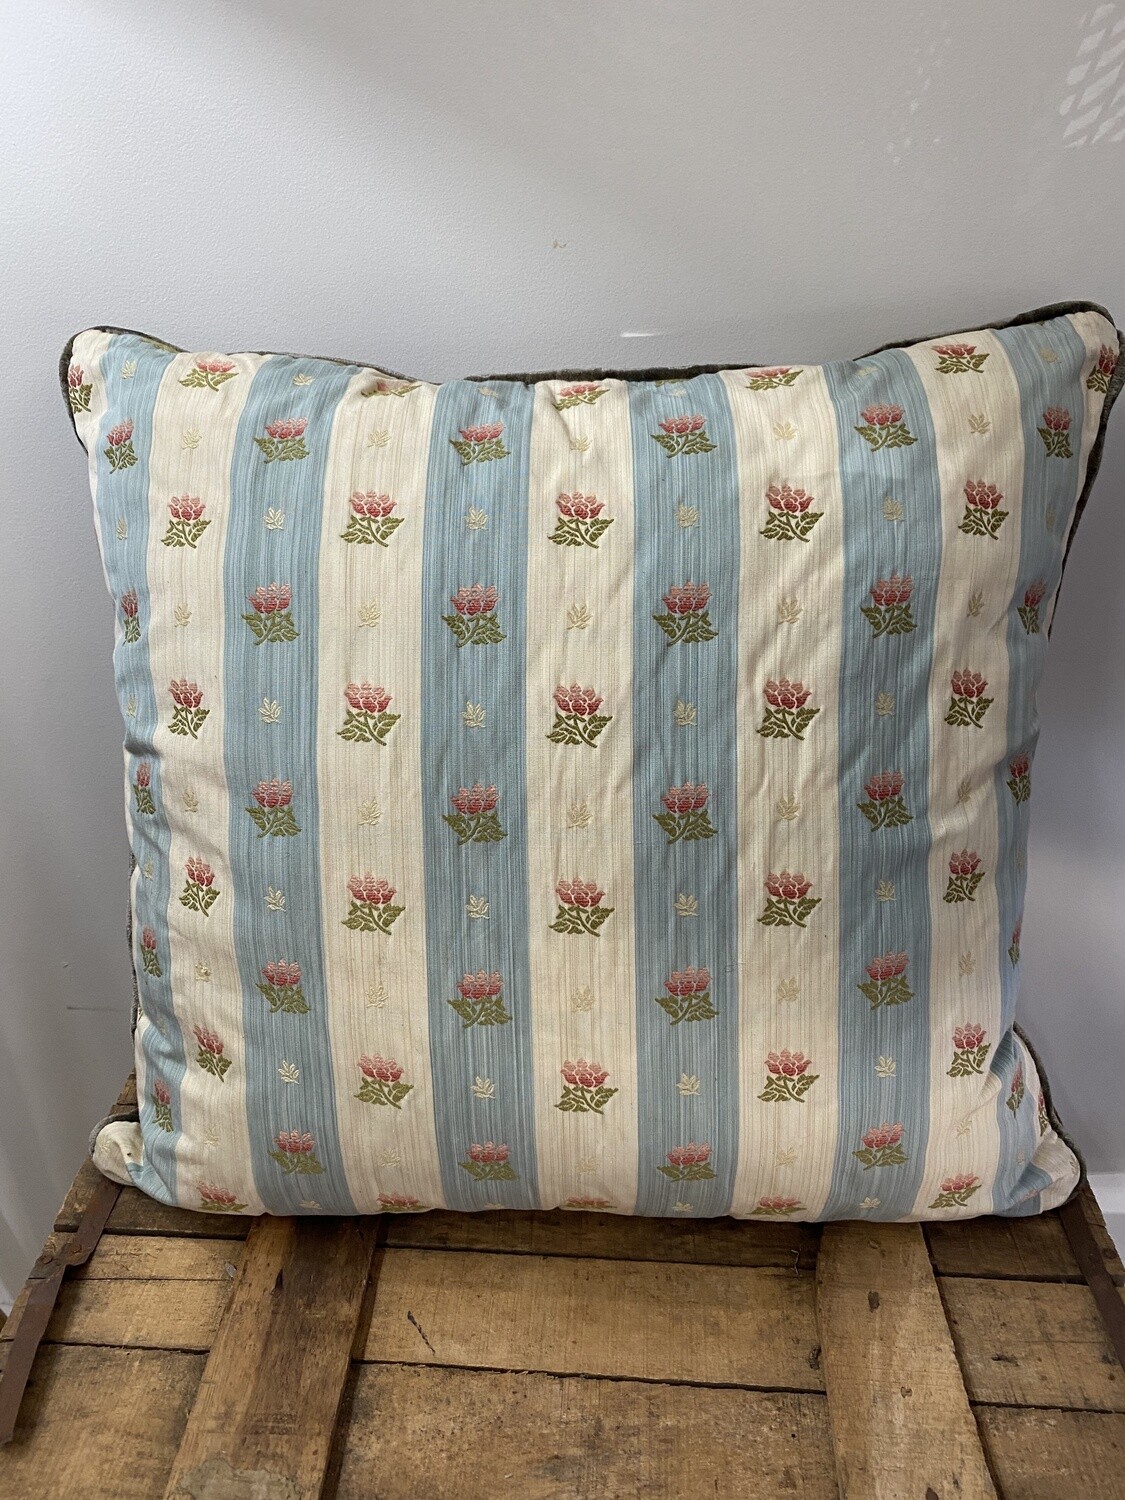 Embroidered silk scatter cushions